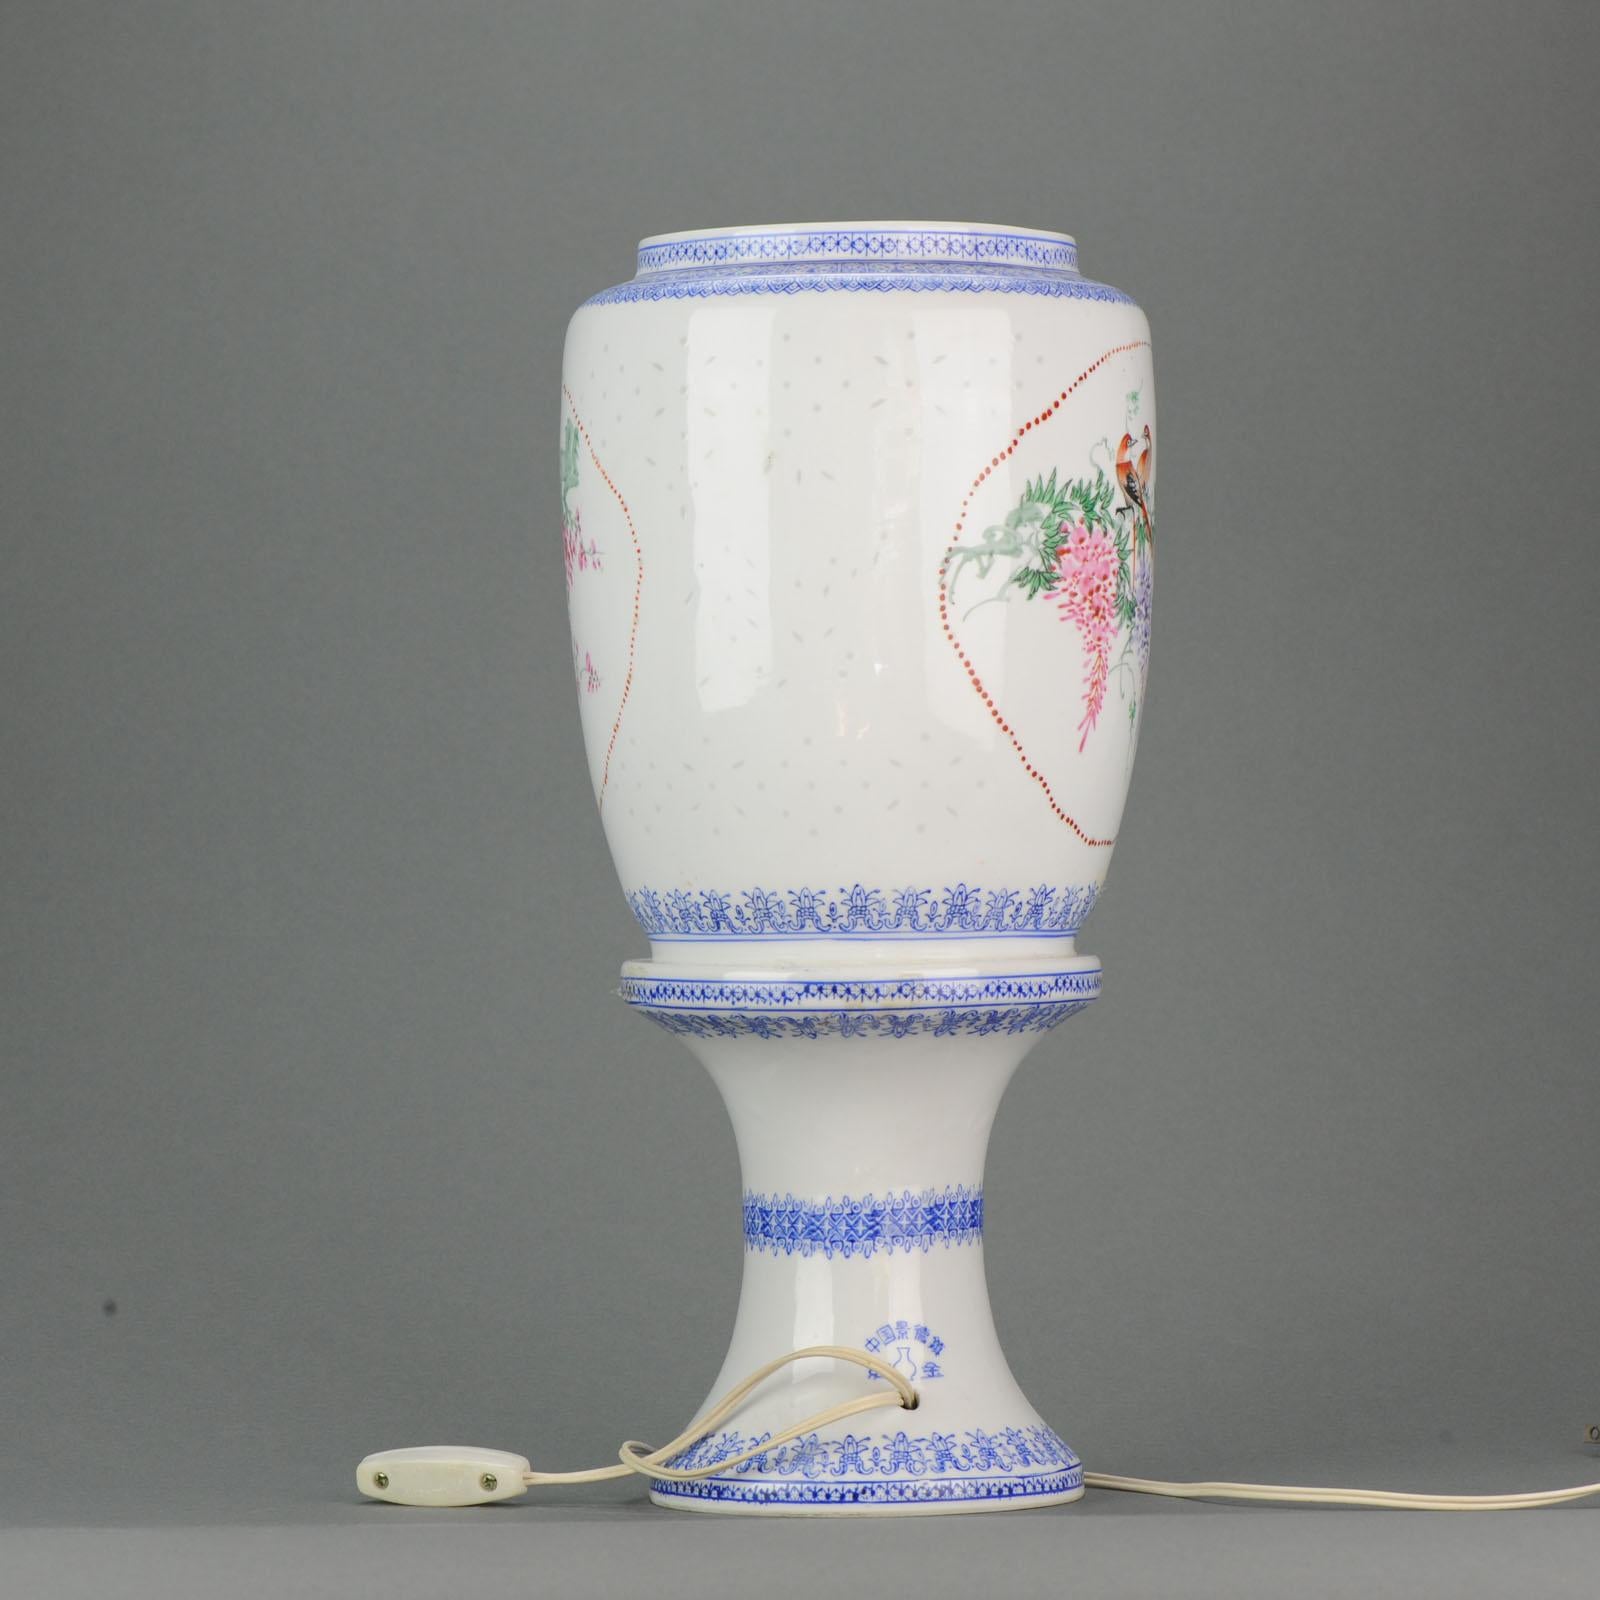 20th Birds Jingdezhen PRoC Eggshell Porcelain Lamp Lantern Chinese Marked In Excellent Condition For Sale In Amsterdam, Noord Holland